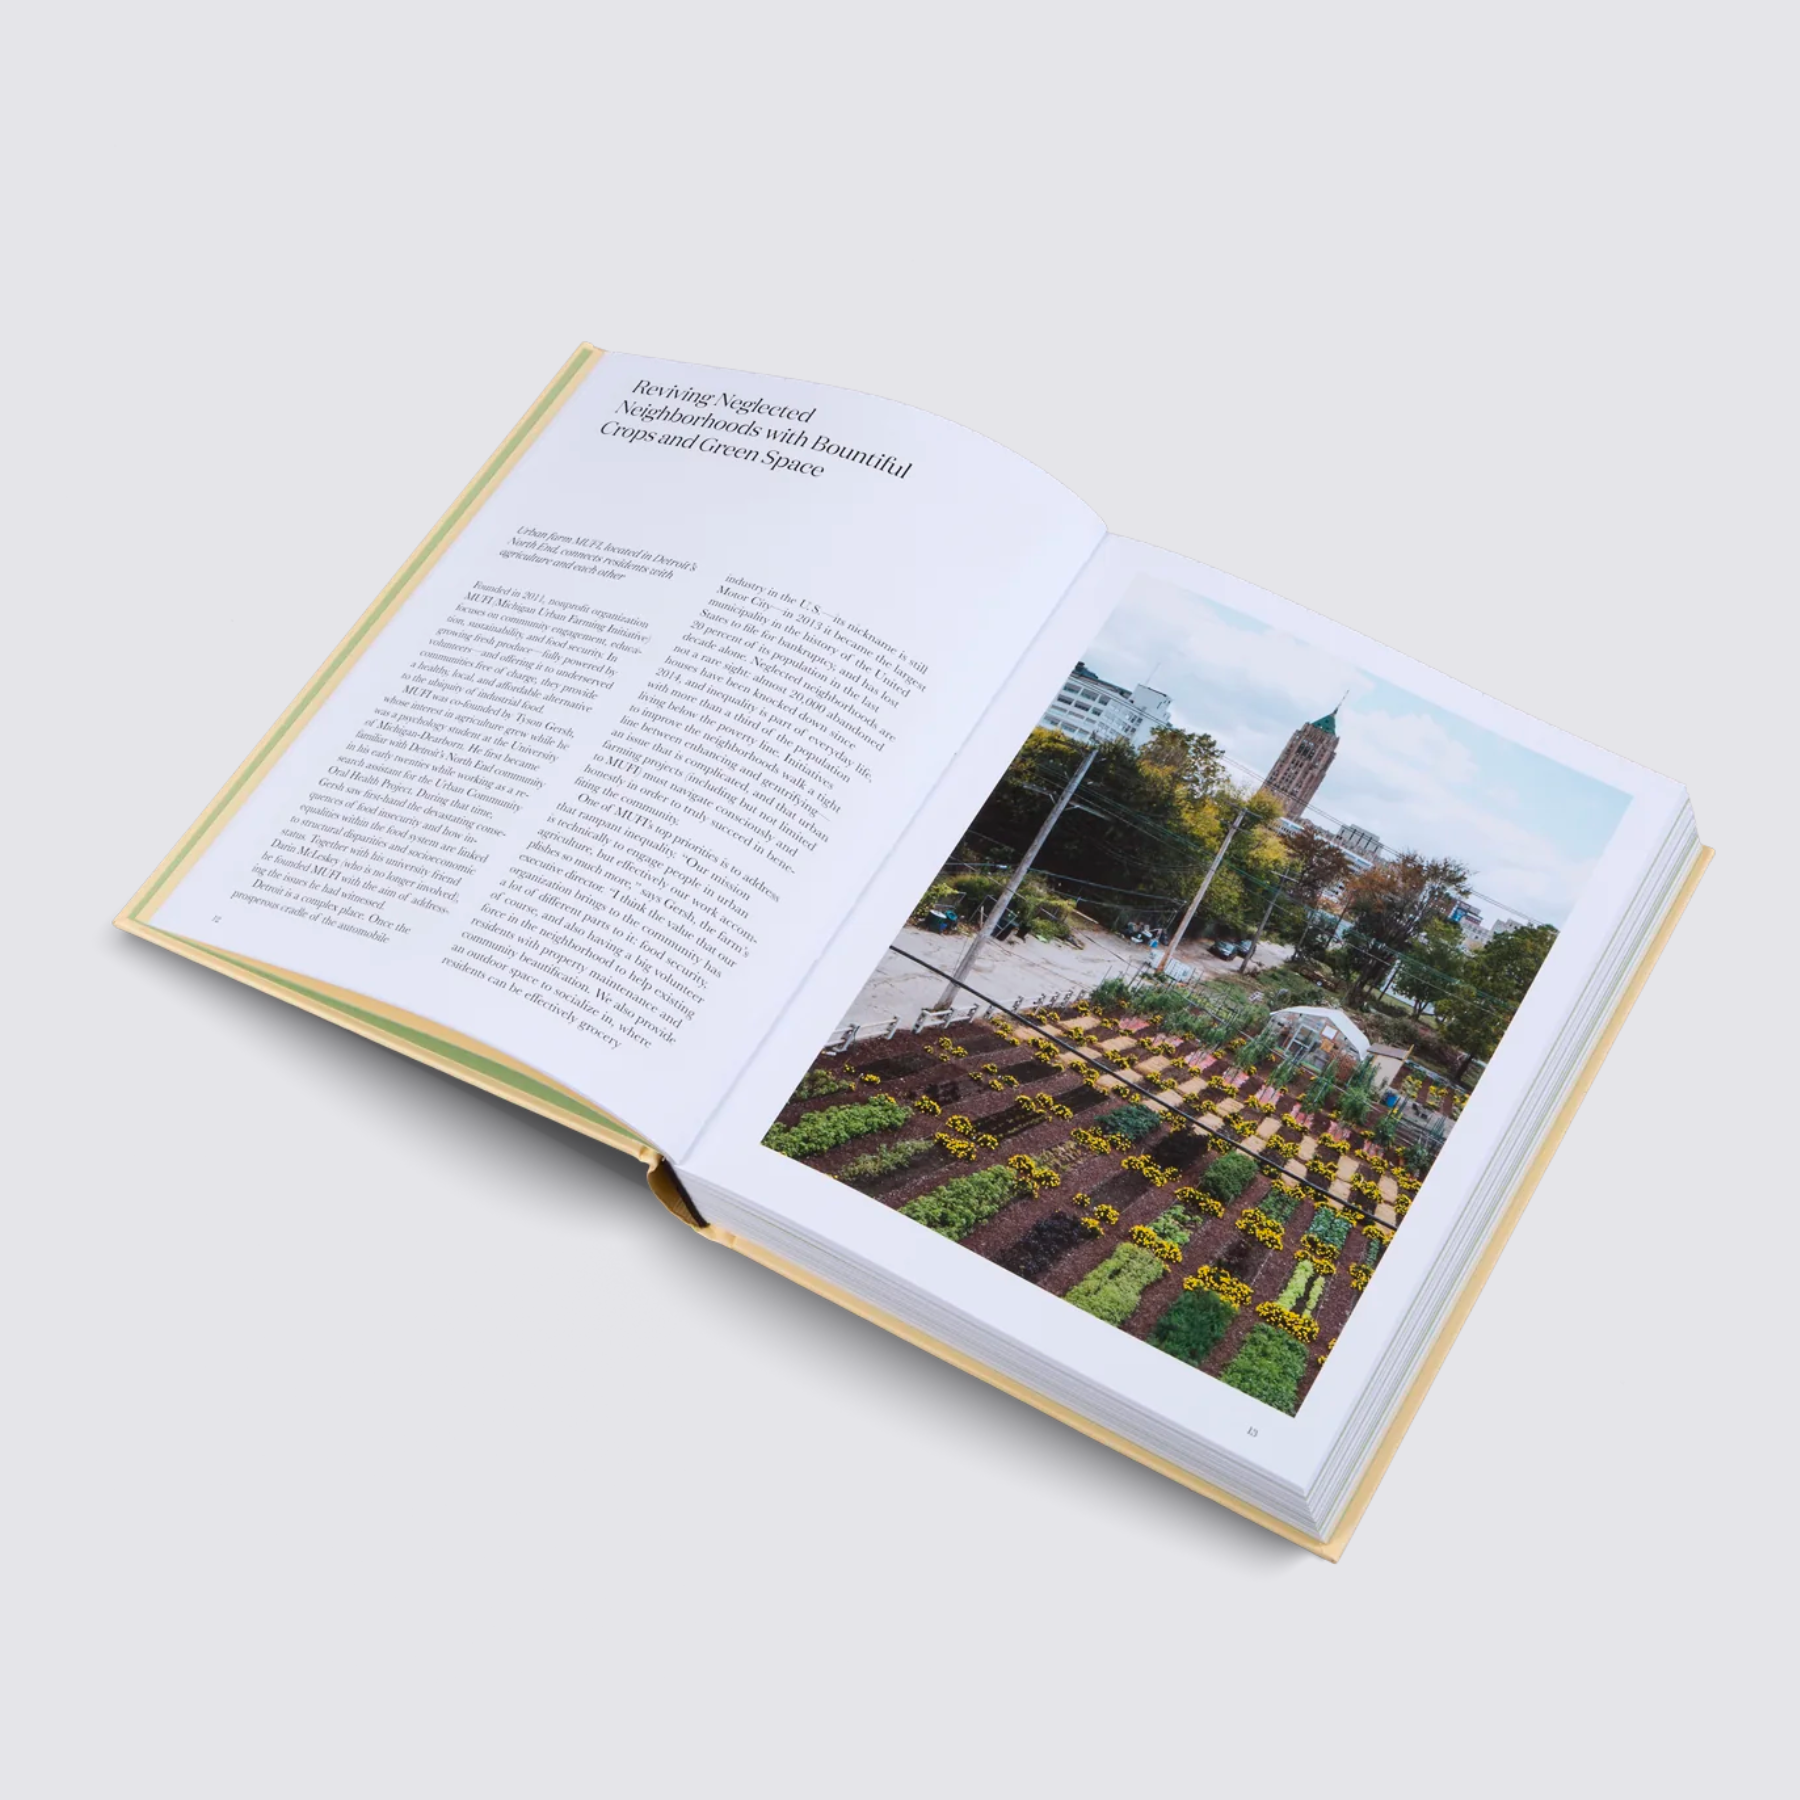 book on growing food in the city